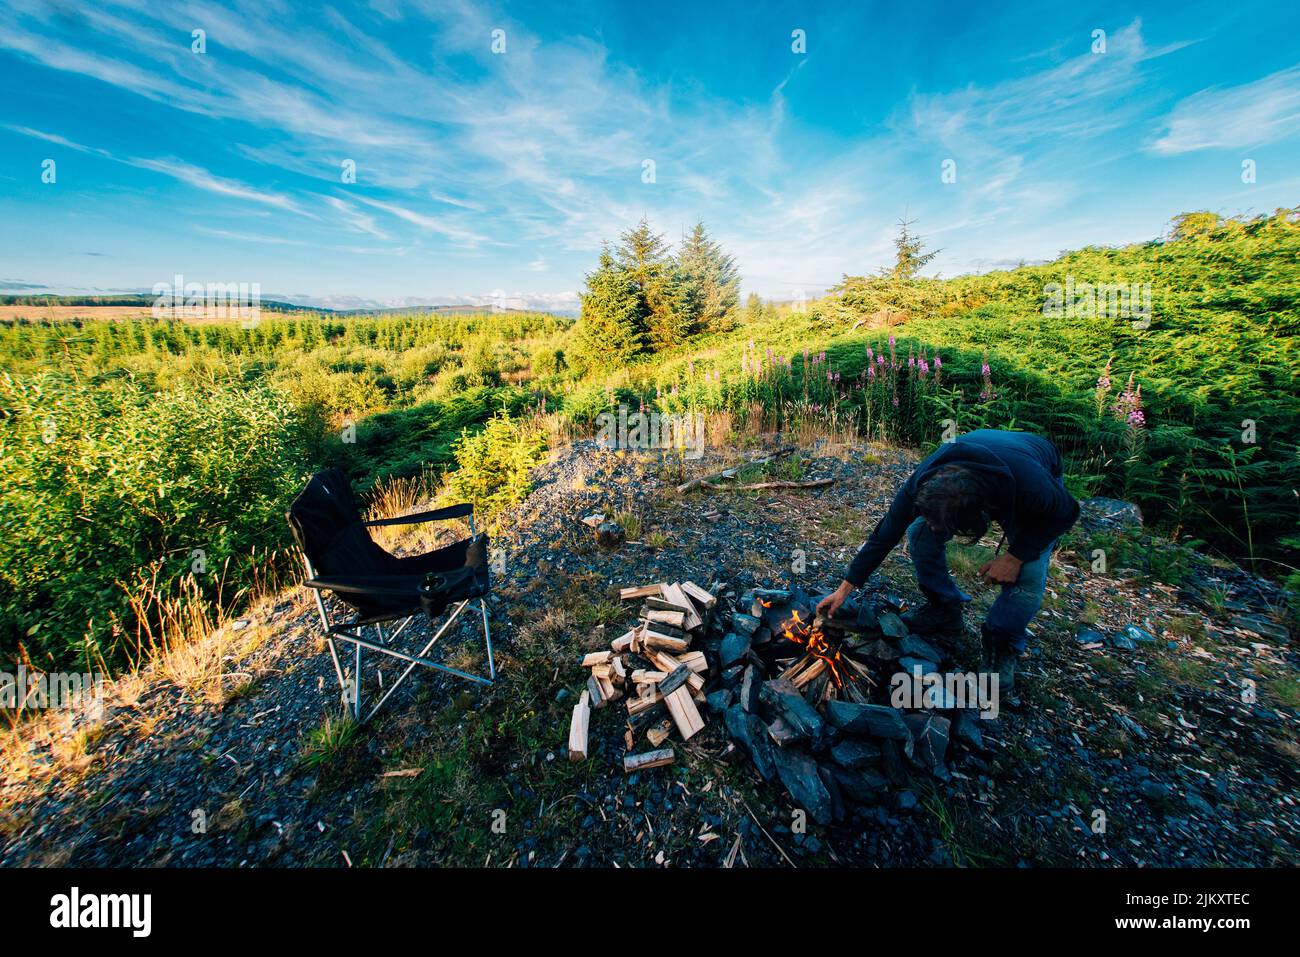 A lone man builds a campfire in galloway forest park, scotland, surrounded by trees and nature. Solitude, off the beaten track, escapism, wild camping Stock Photo